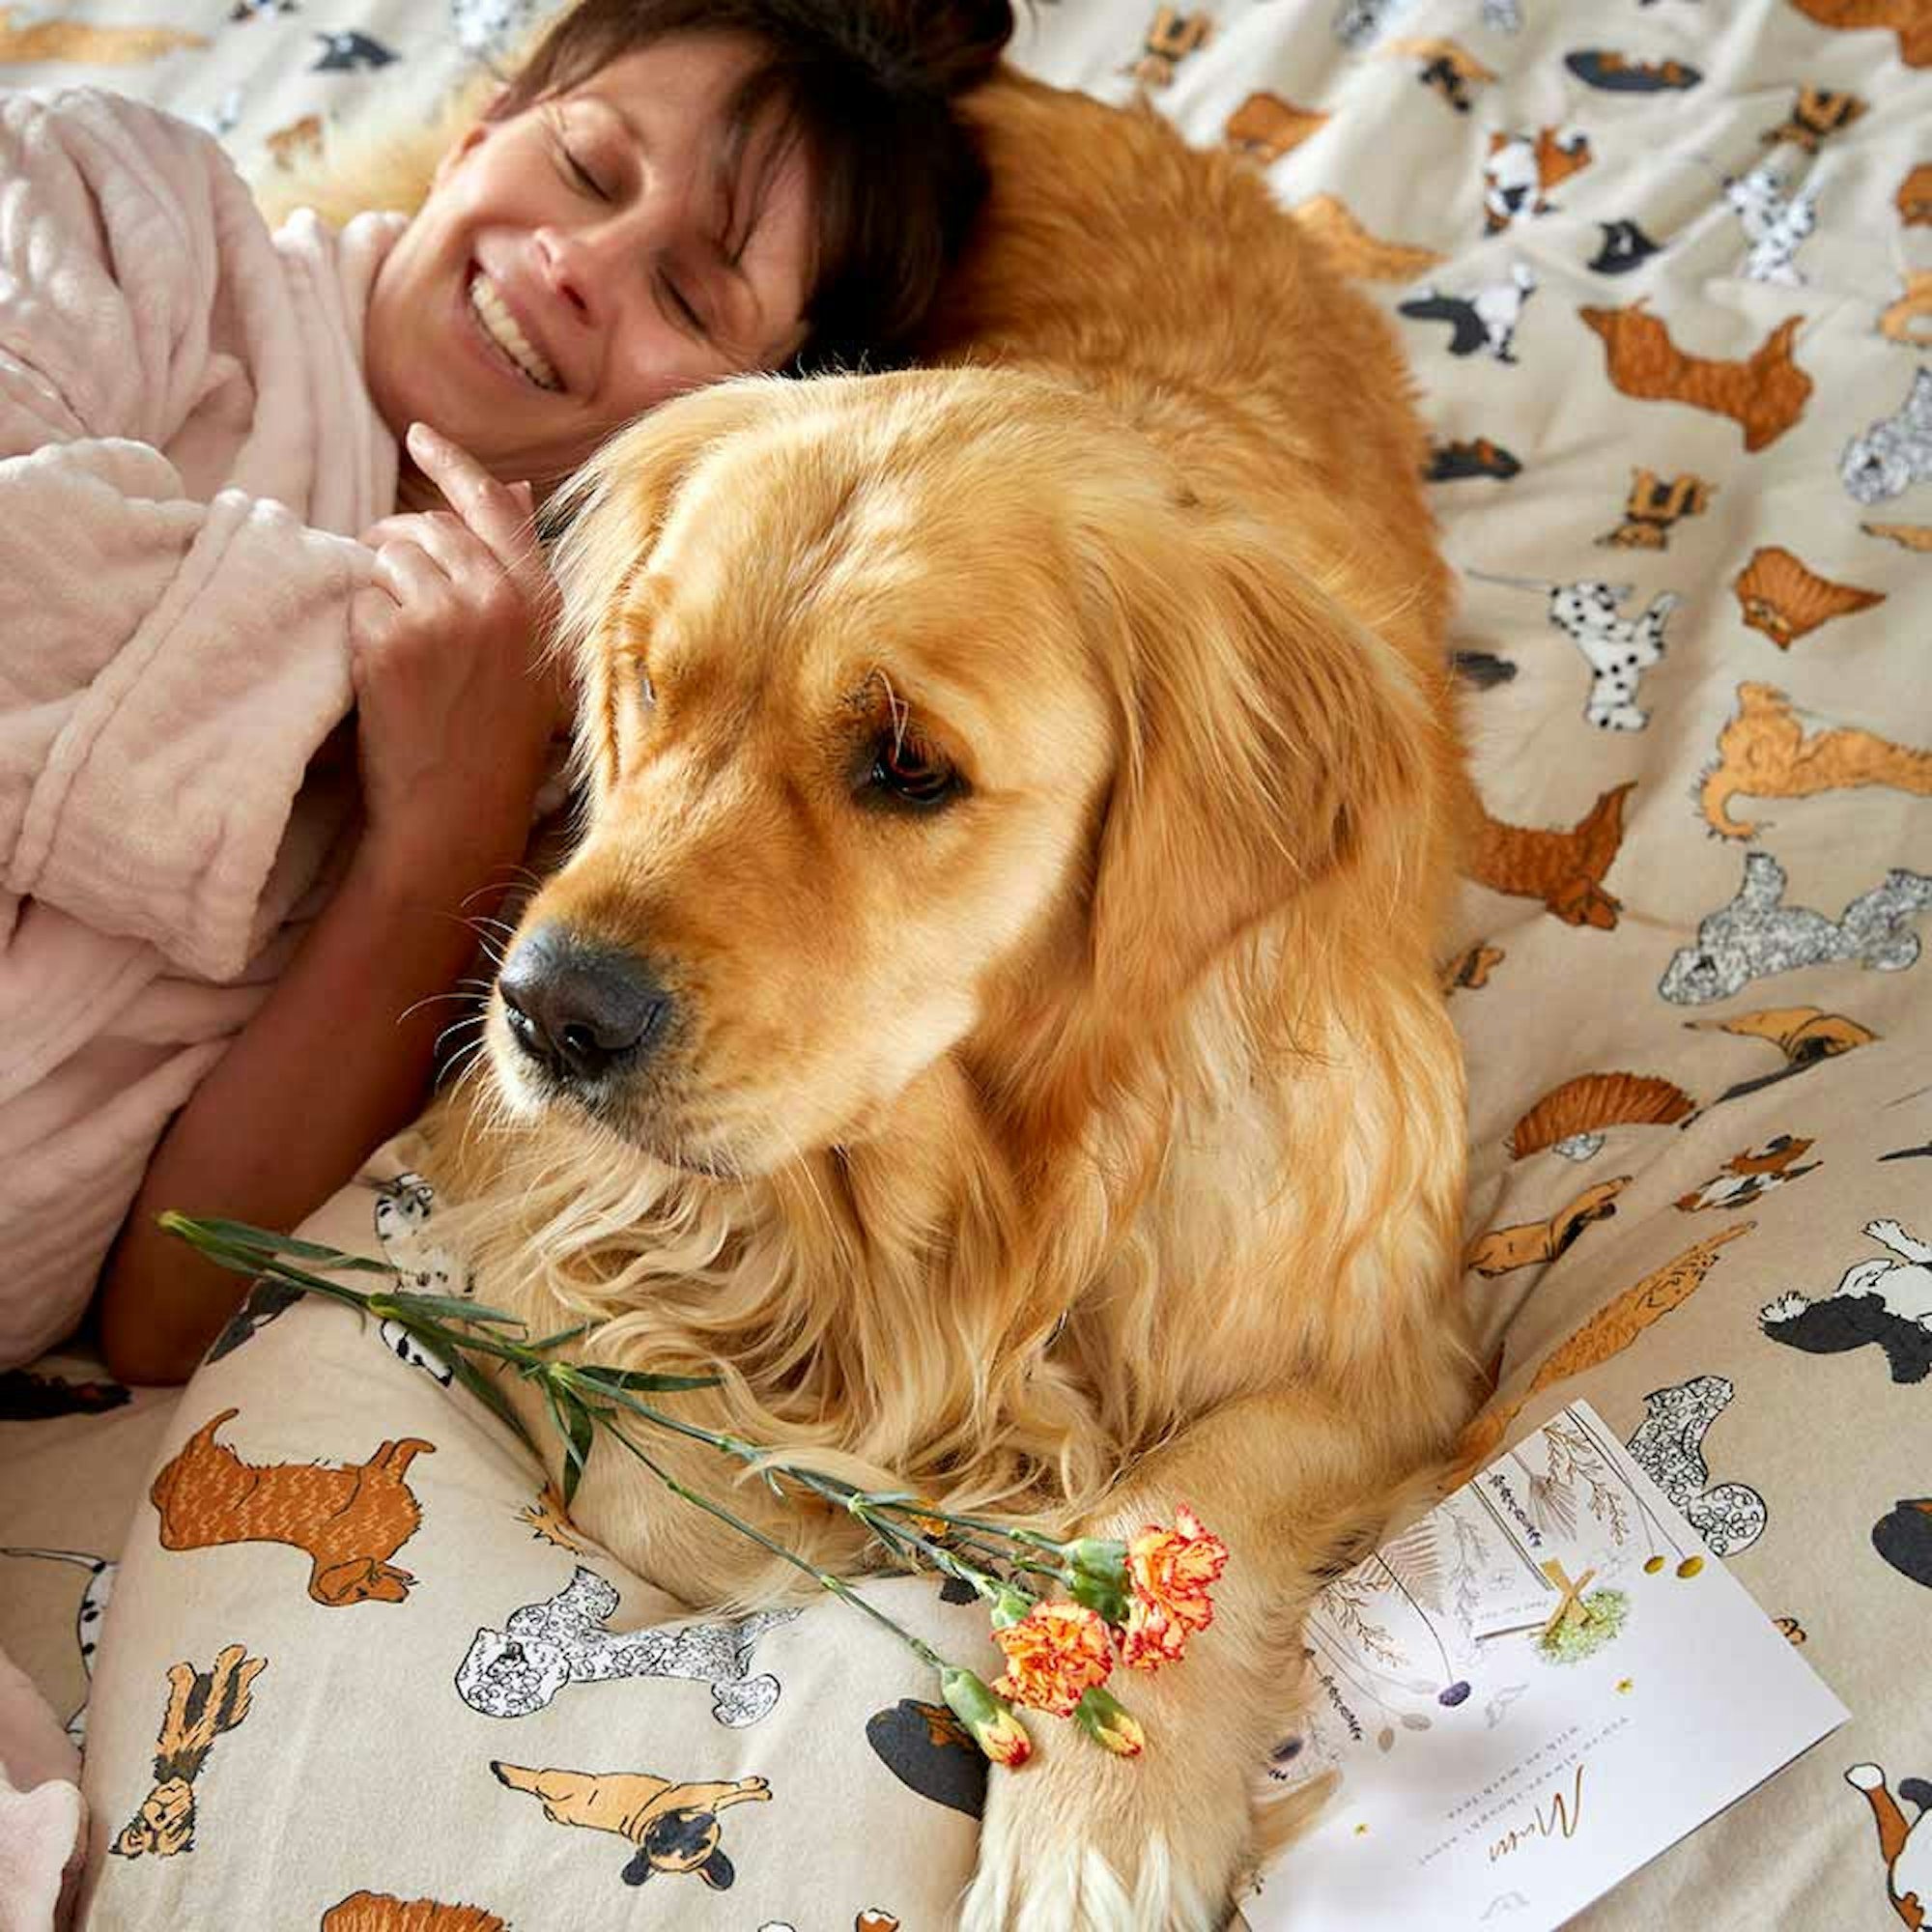 MyHouse Printed Dogs Flannelette Sheet Set. Mother's day Gift guide. Mum lying on bed with dog.